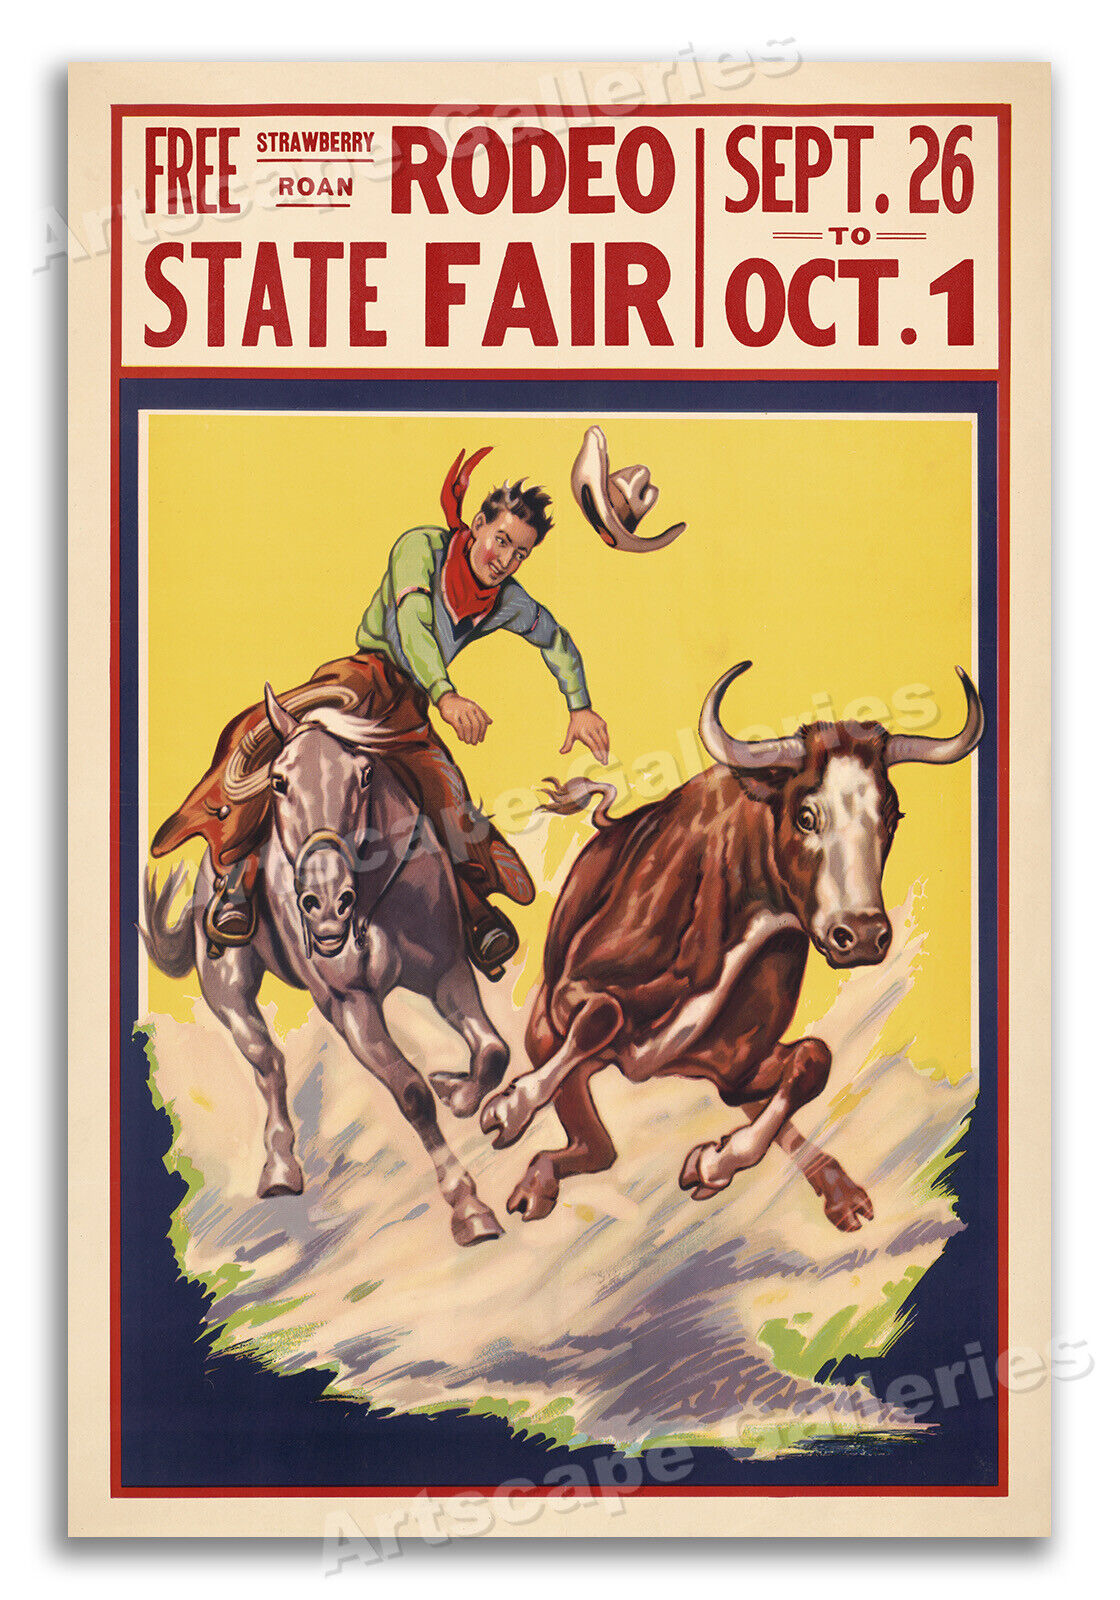 1930s Cowboy Rodeo Poster - State Fair Steer Wrestling - 16x24